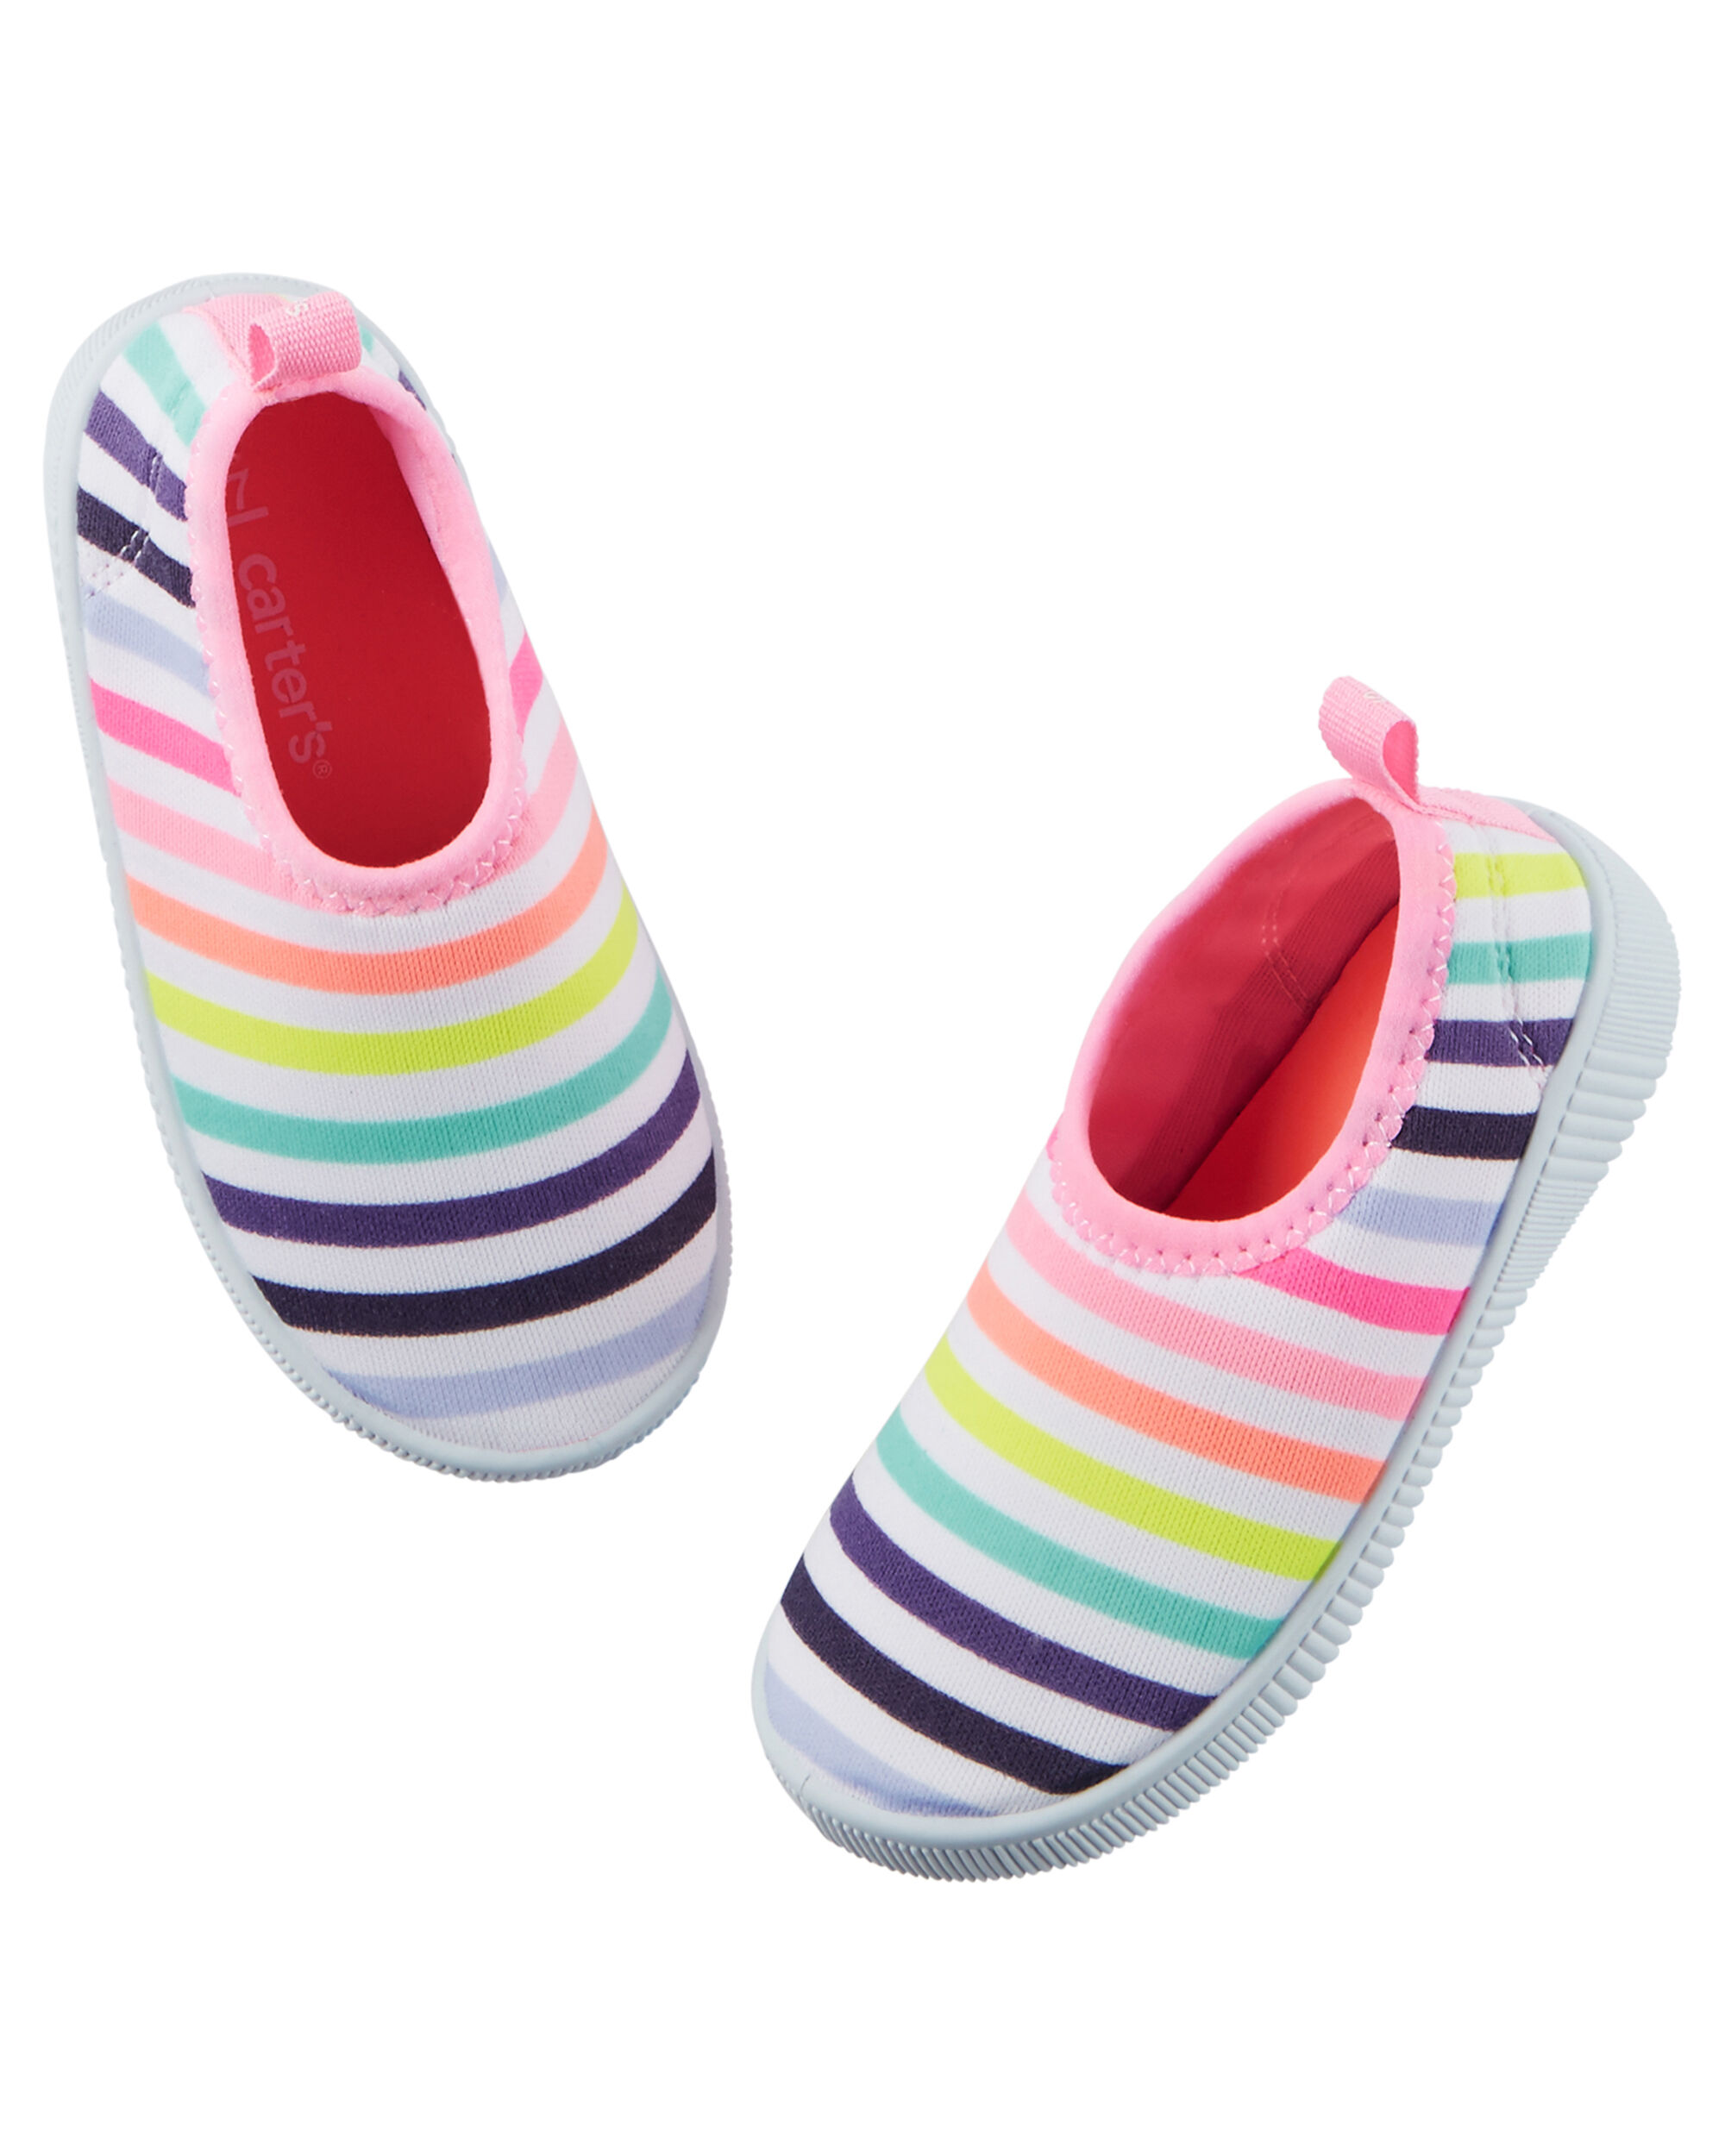 Carter's Slip-On Water Shoes | carters.com